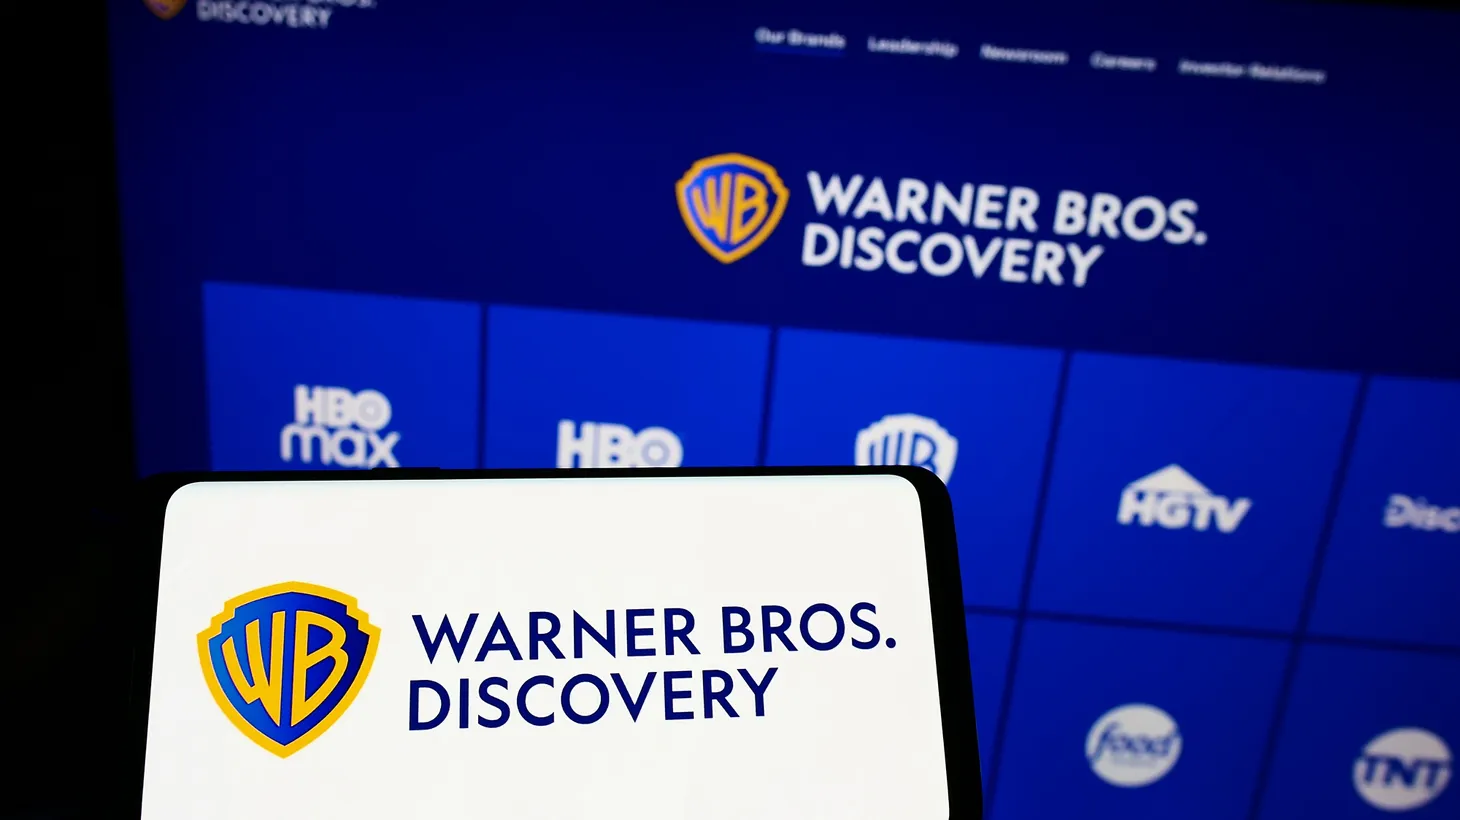 Warner Bros. Discovery CEO David Zaslav “seems much more focused on maximizing profitability in the short term because he's got all that debt from the merger,” says Matt Belloni.